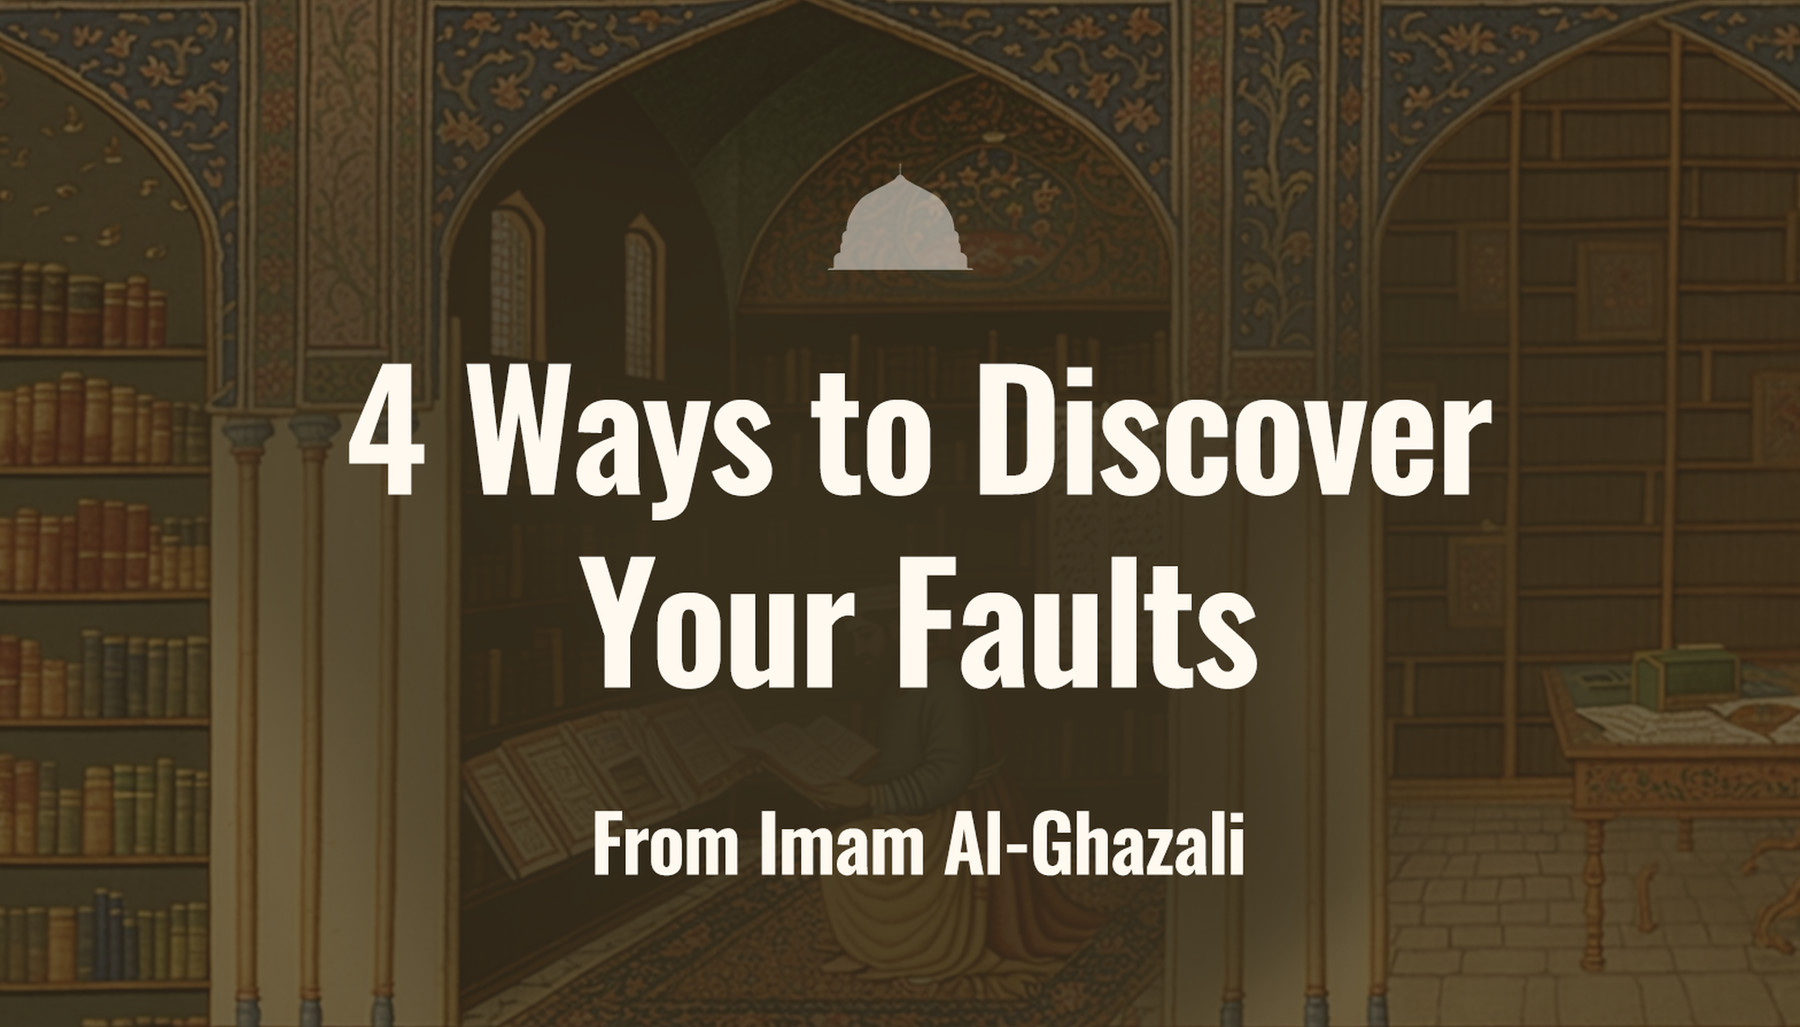 4 Ways to Discover Your Faults